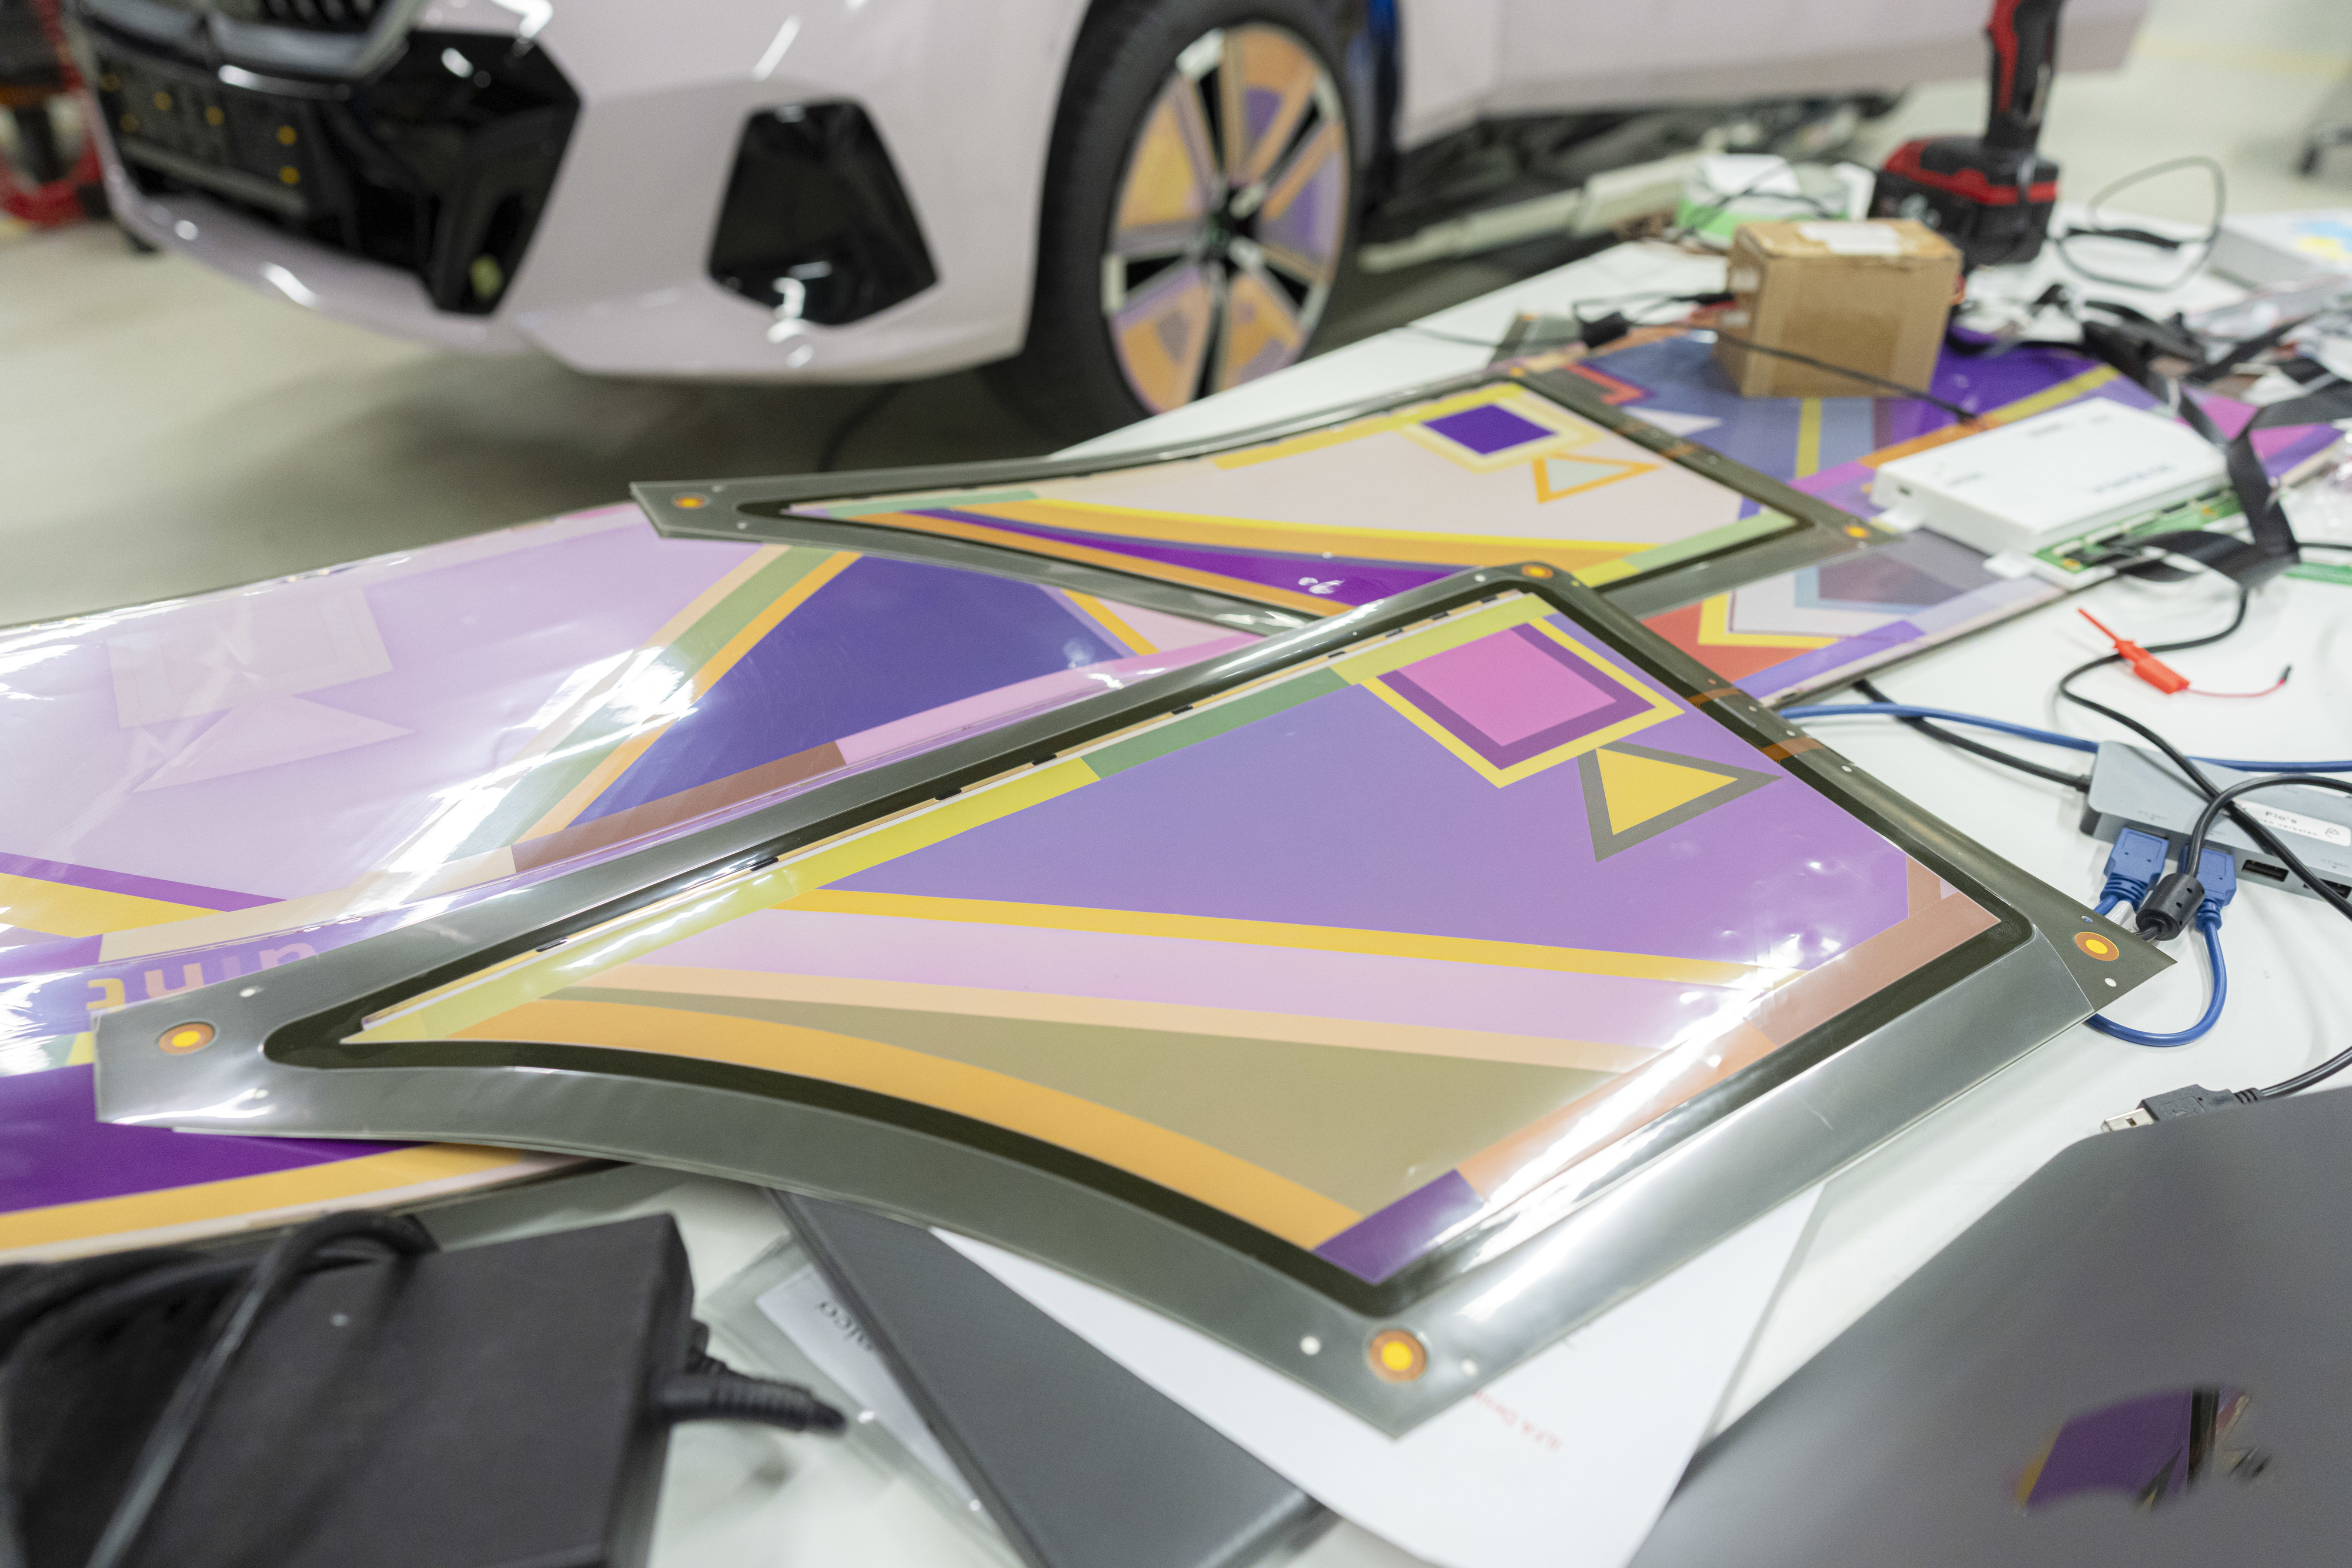 Car wraps with geometric patterns laid out for application, work equipment in background